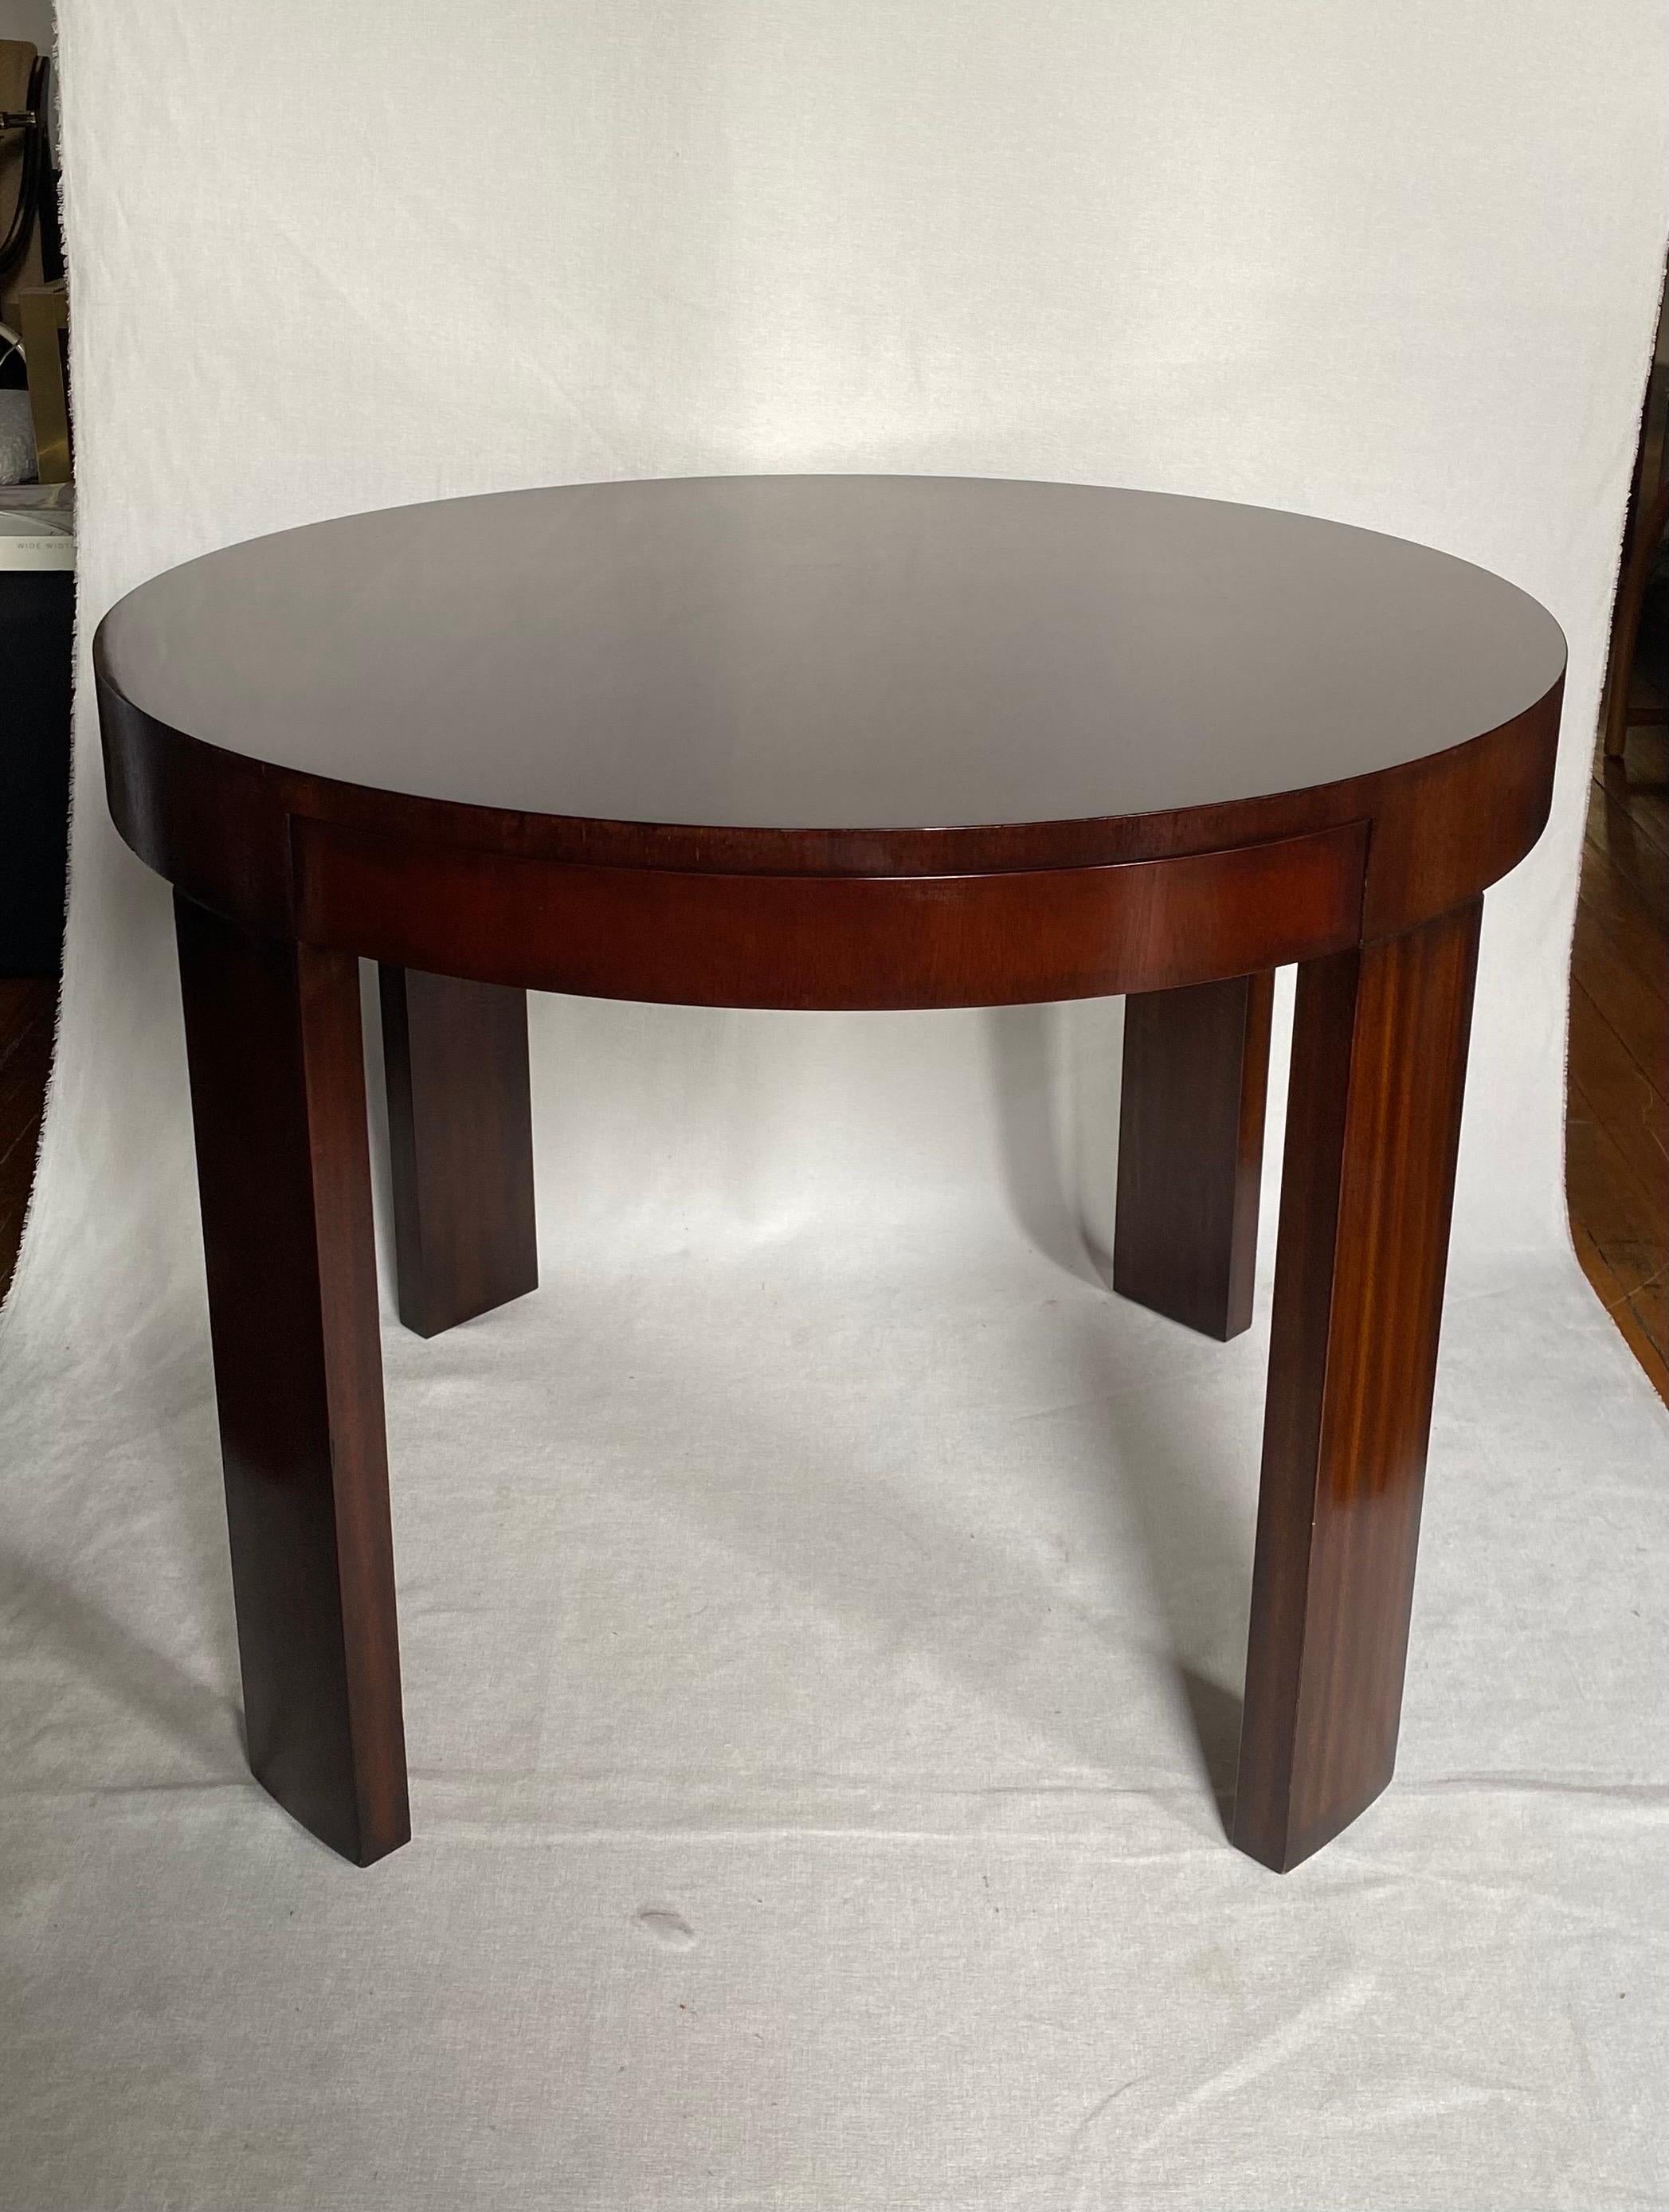 Ralph Lauren Home Beekman bedside or center table.  This handsome round accent table blends traditional and modern styling and features beautifully grained mahogany wood in a high gloss reflective finish.  This large sleek 38